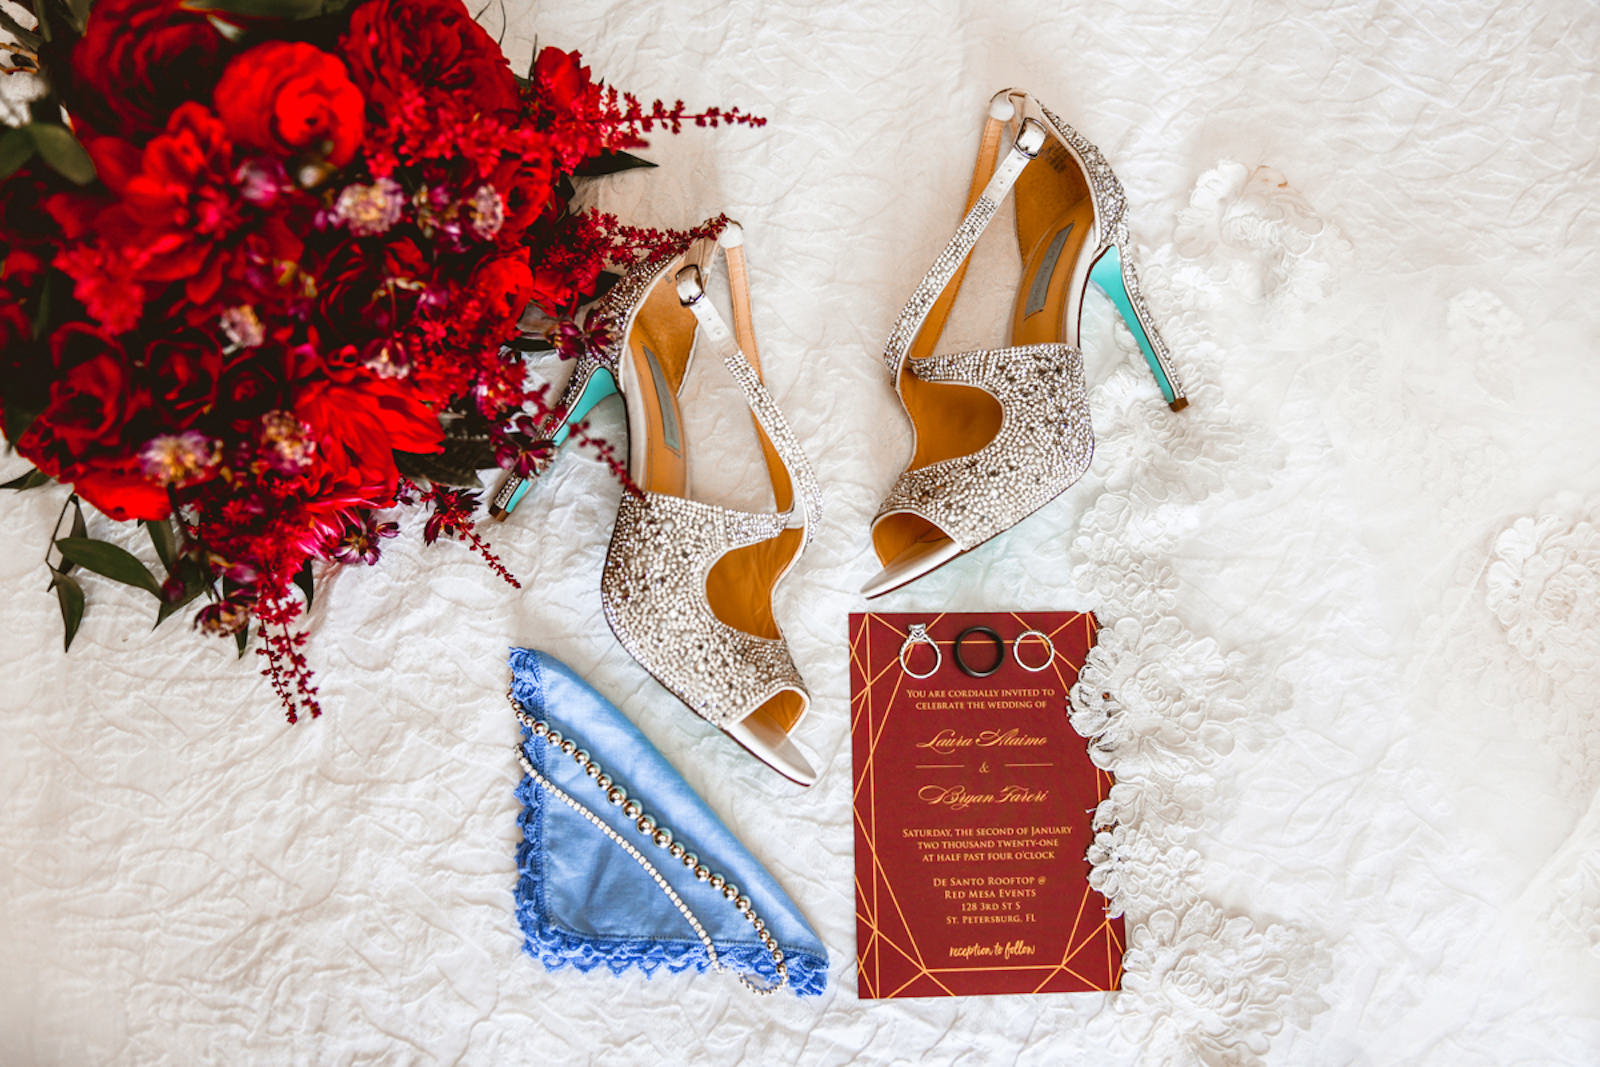 Burgundy Red and Gold Geometric Pattern Wedding Invitation, Silver Rhinestone Shoes with Tiffany Blue Bottoms, Blue Handkerchief, Red Floral Bouquet